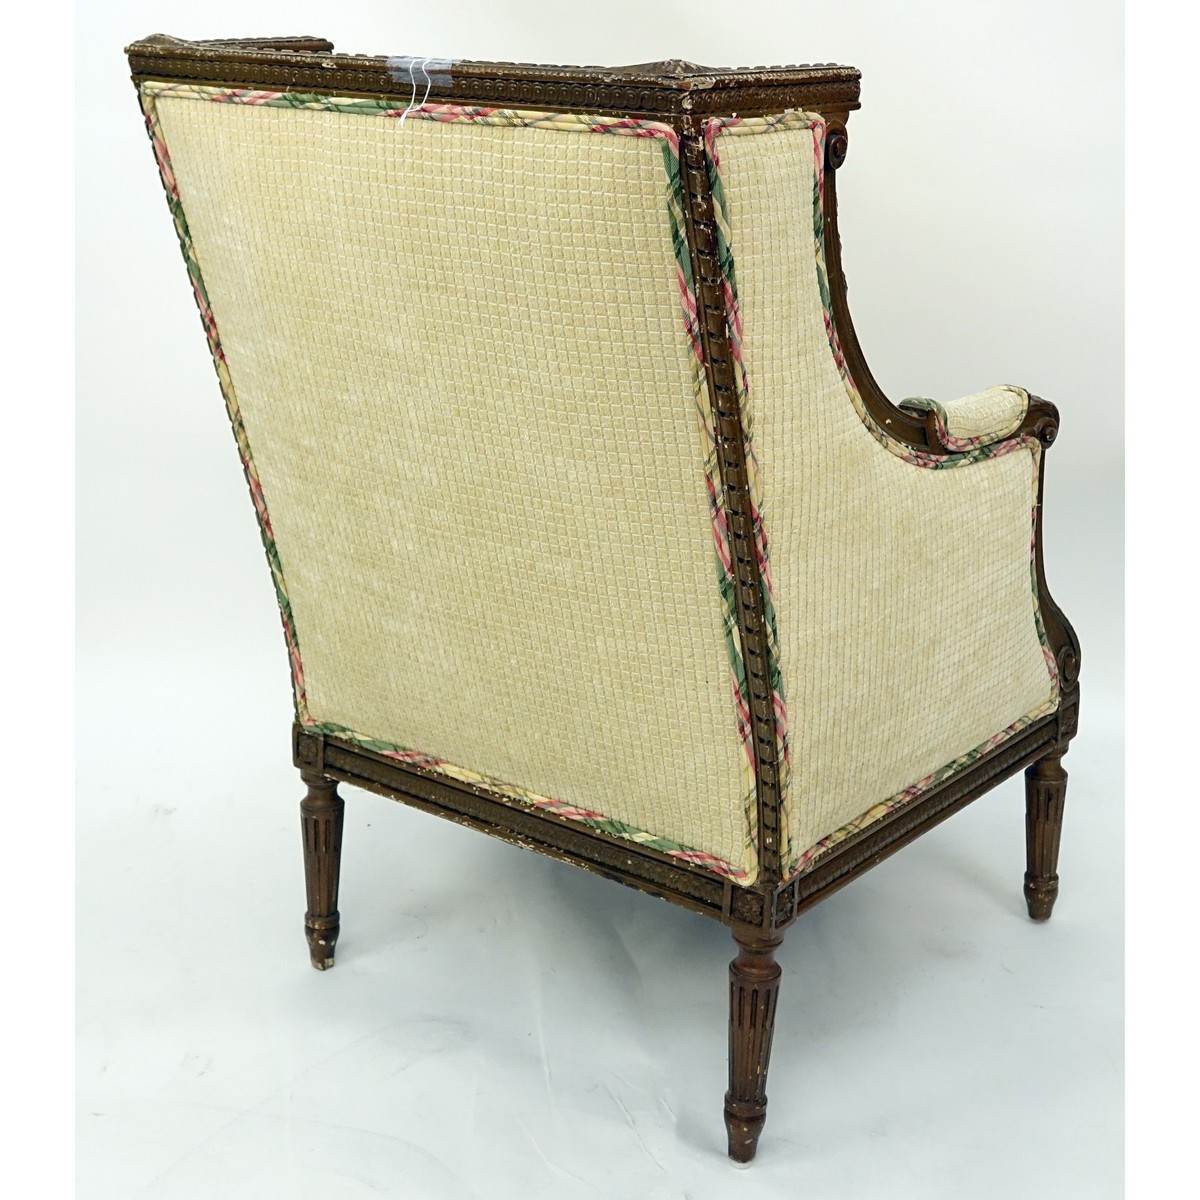 19/20th Century French Louis XVI Style Carved Wood and Upholstered Bergere. Neoclassical details of florals and fluted legs.